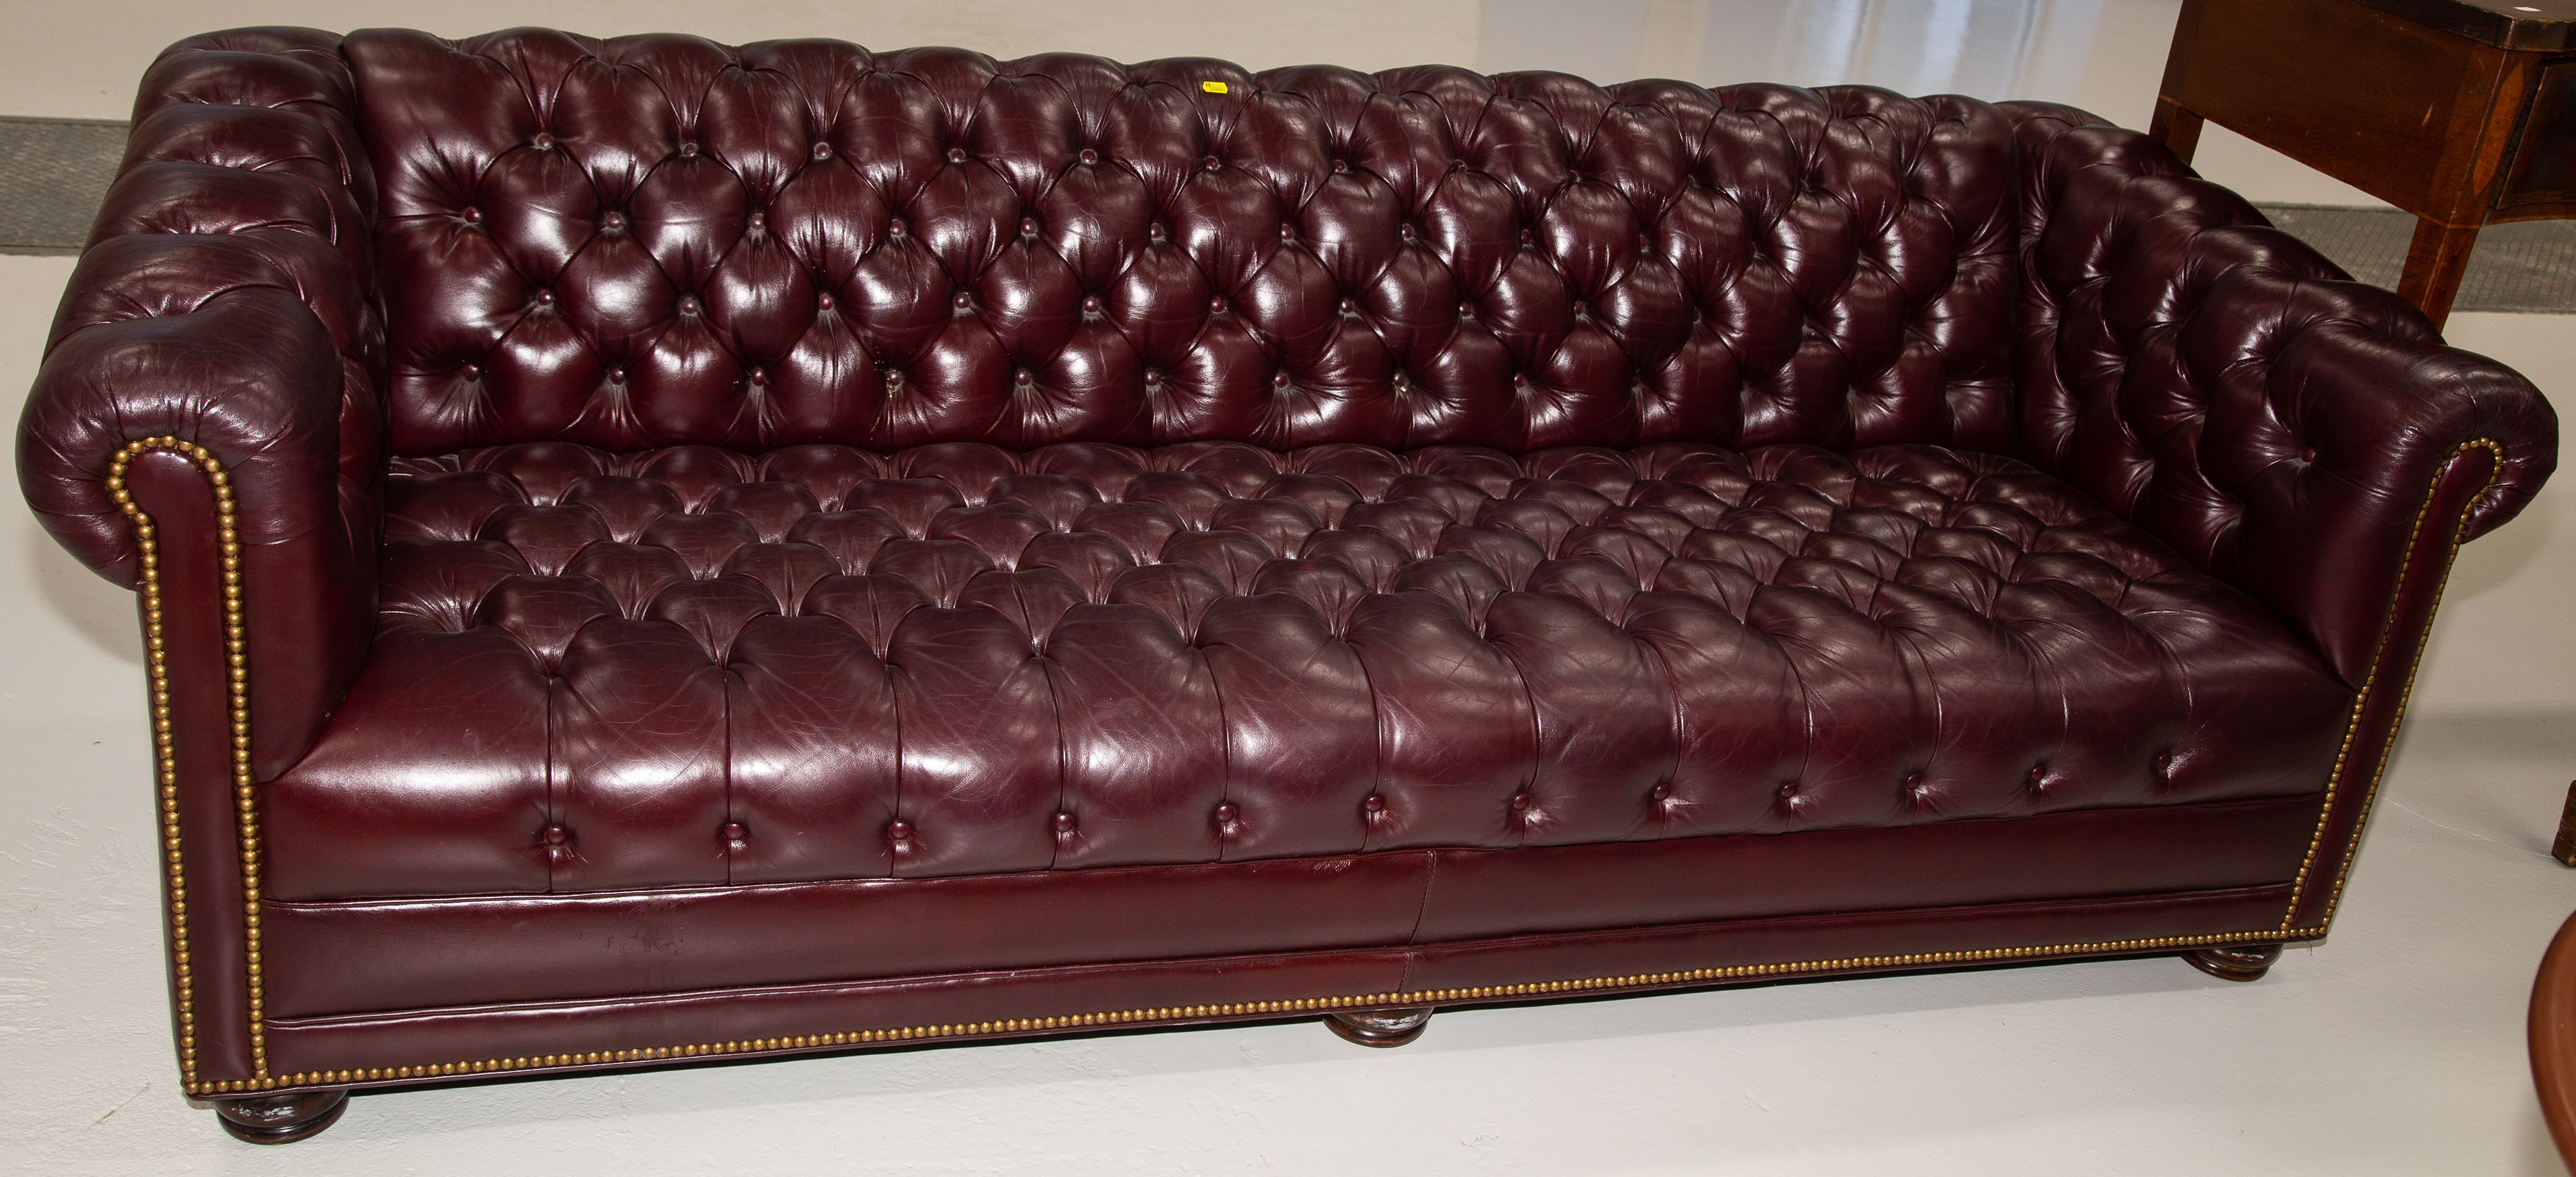 A TUFTED LEATHER SOFA Possibly 3350c6